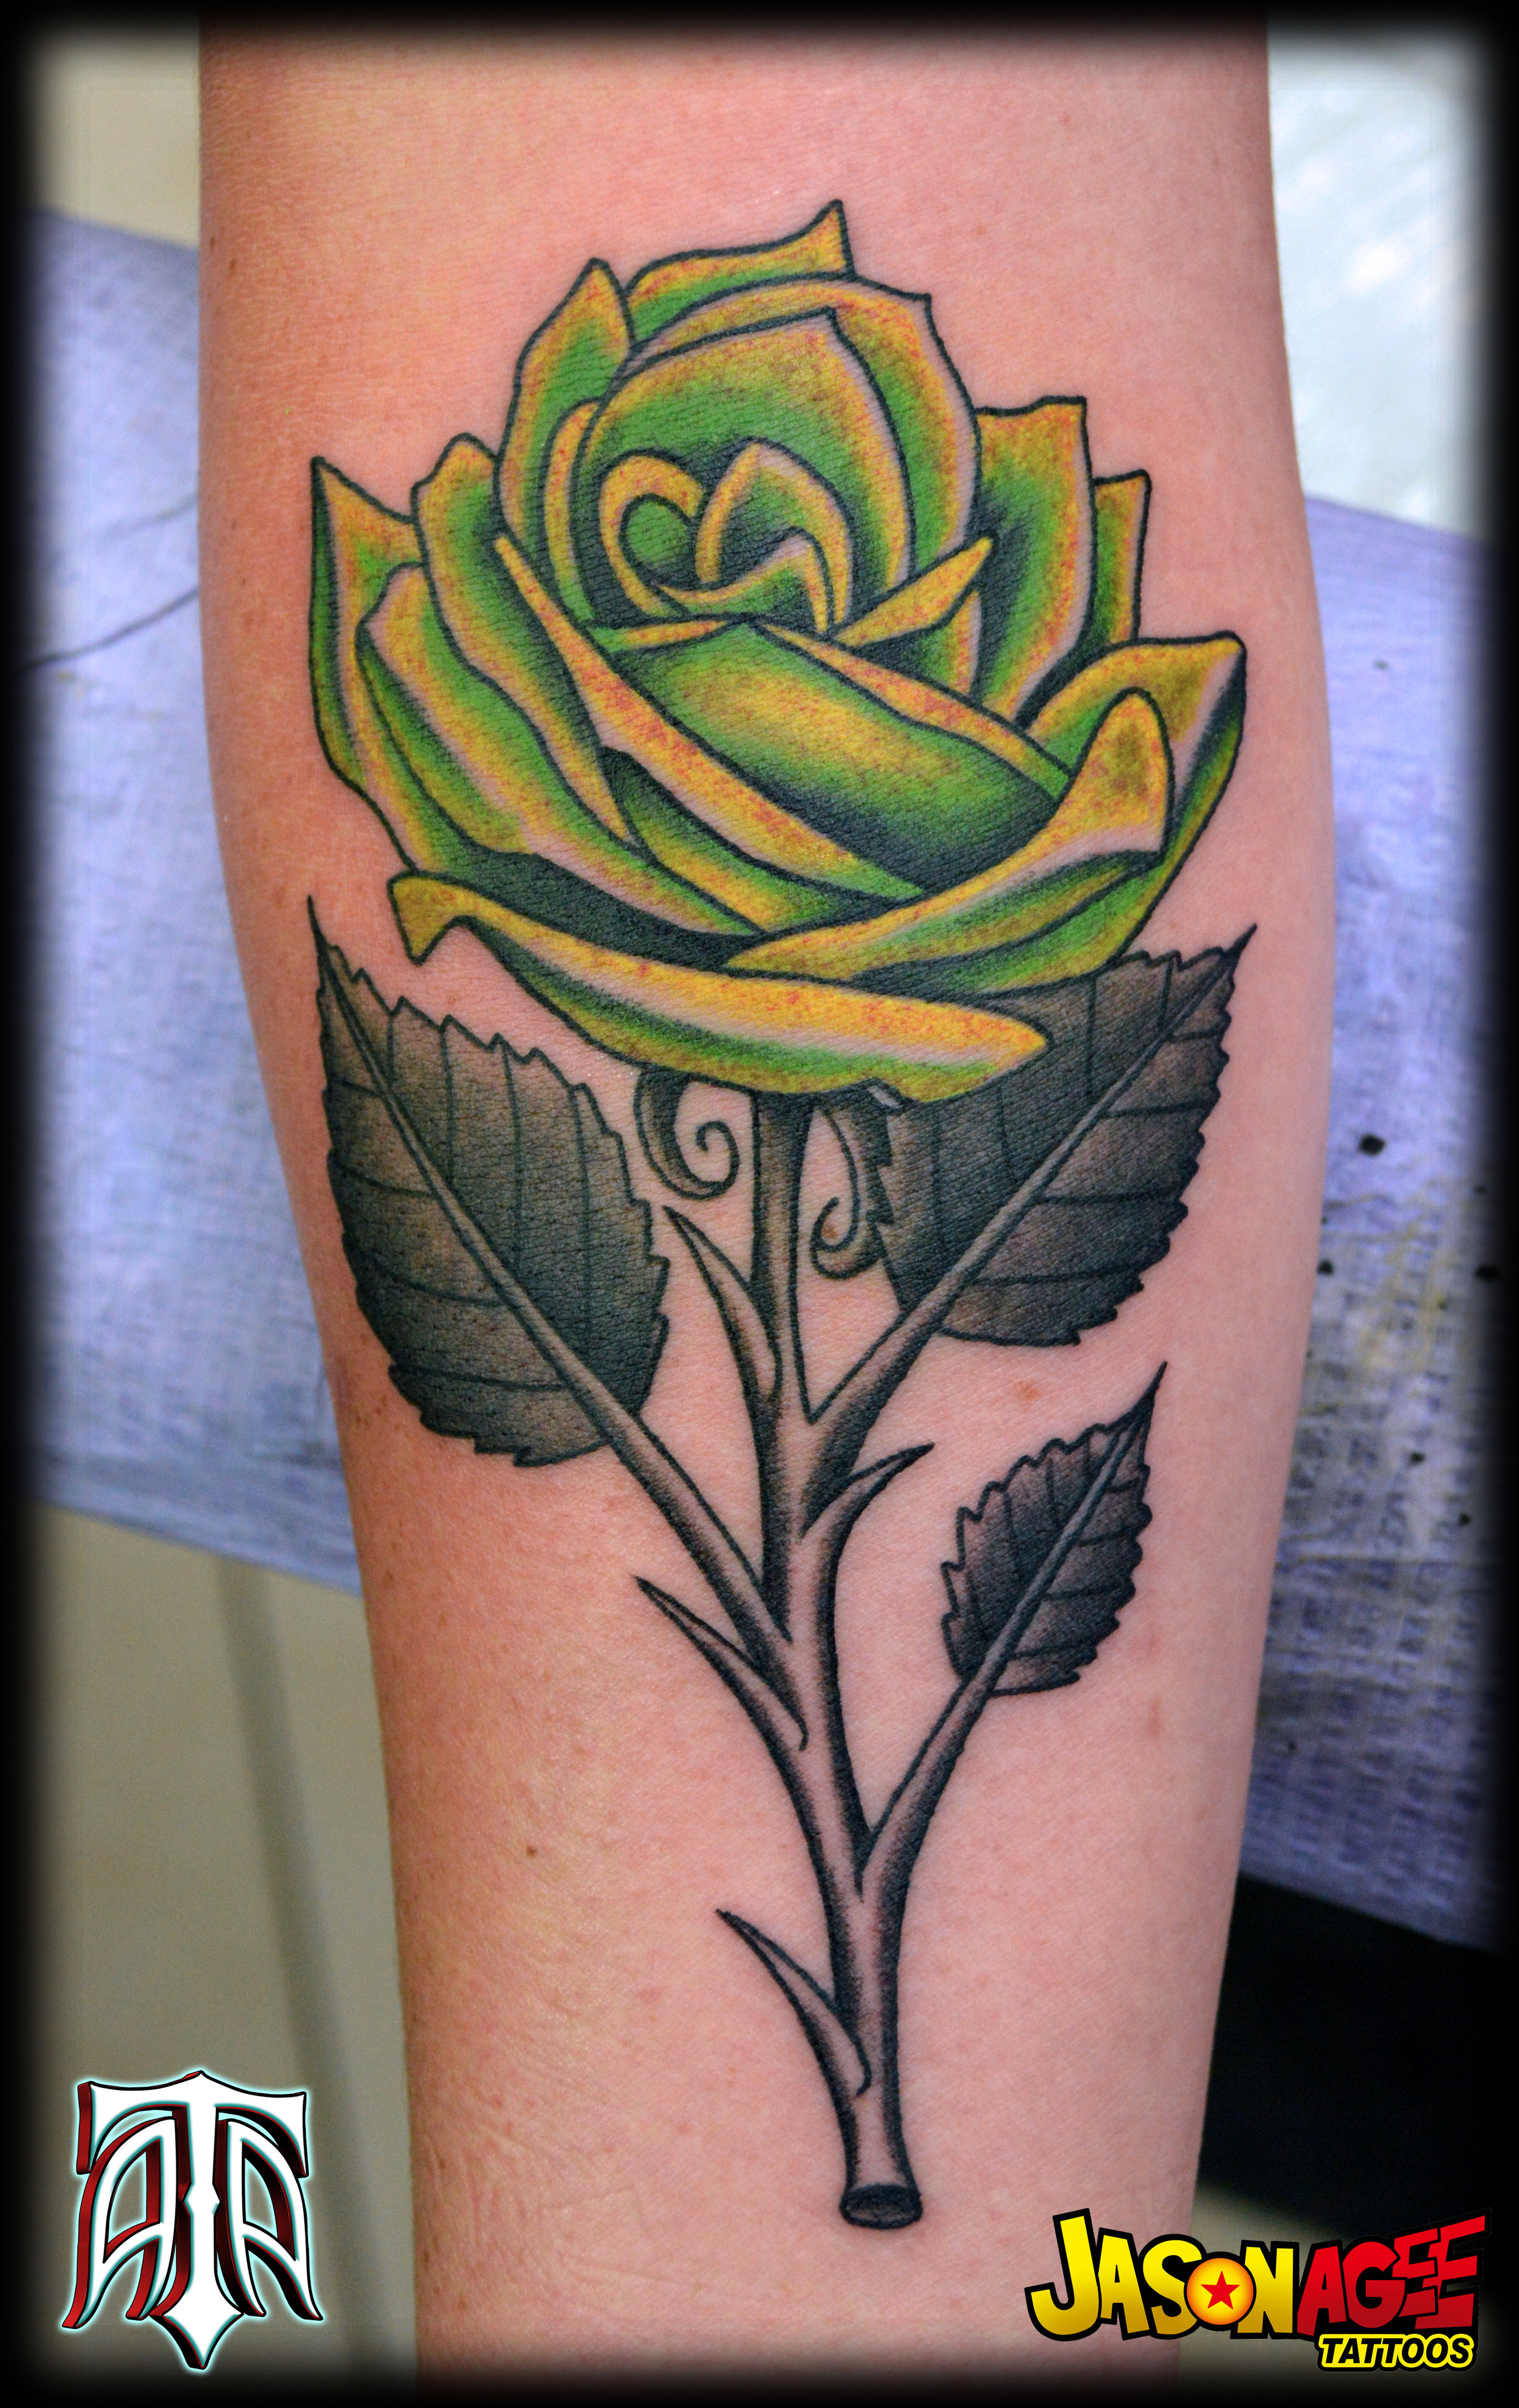 The True Meaning of Black Rose Tattoo That Many Dont Know